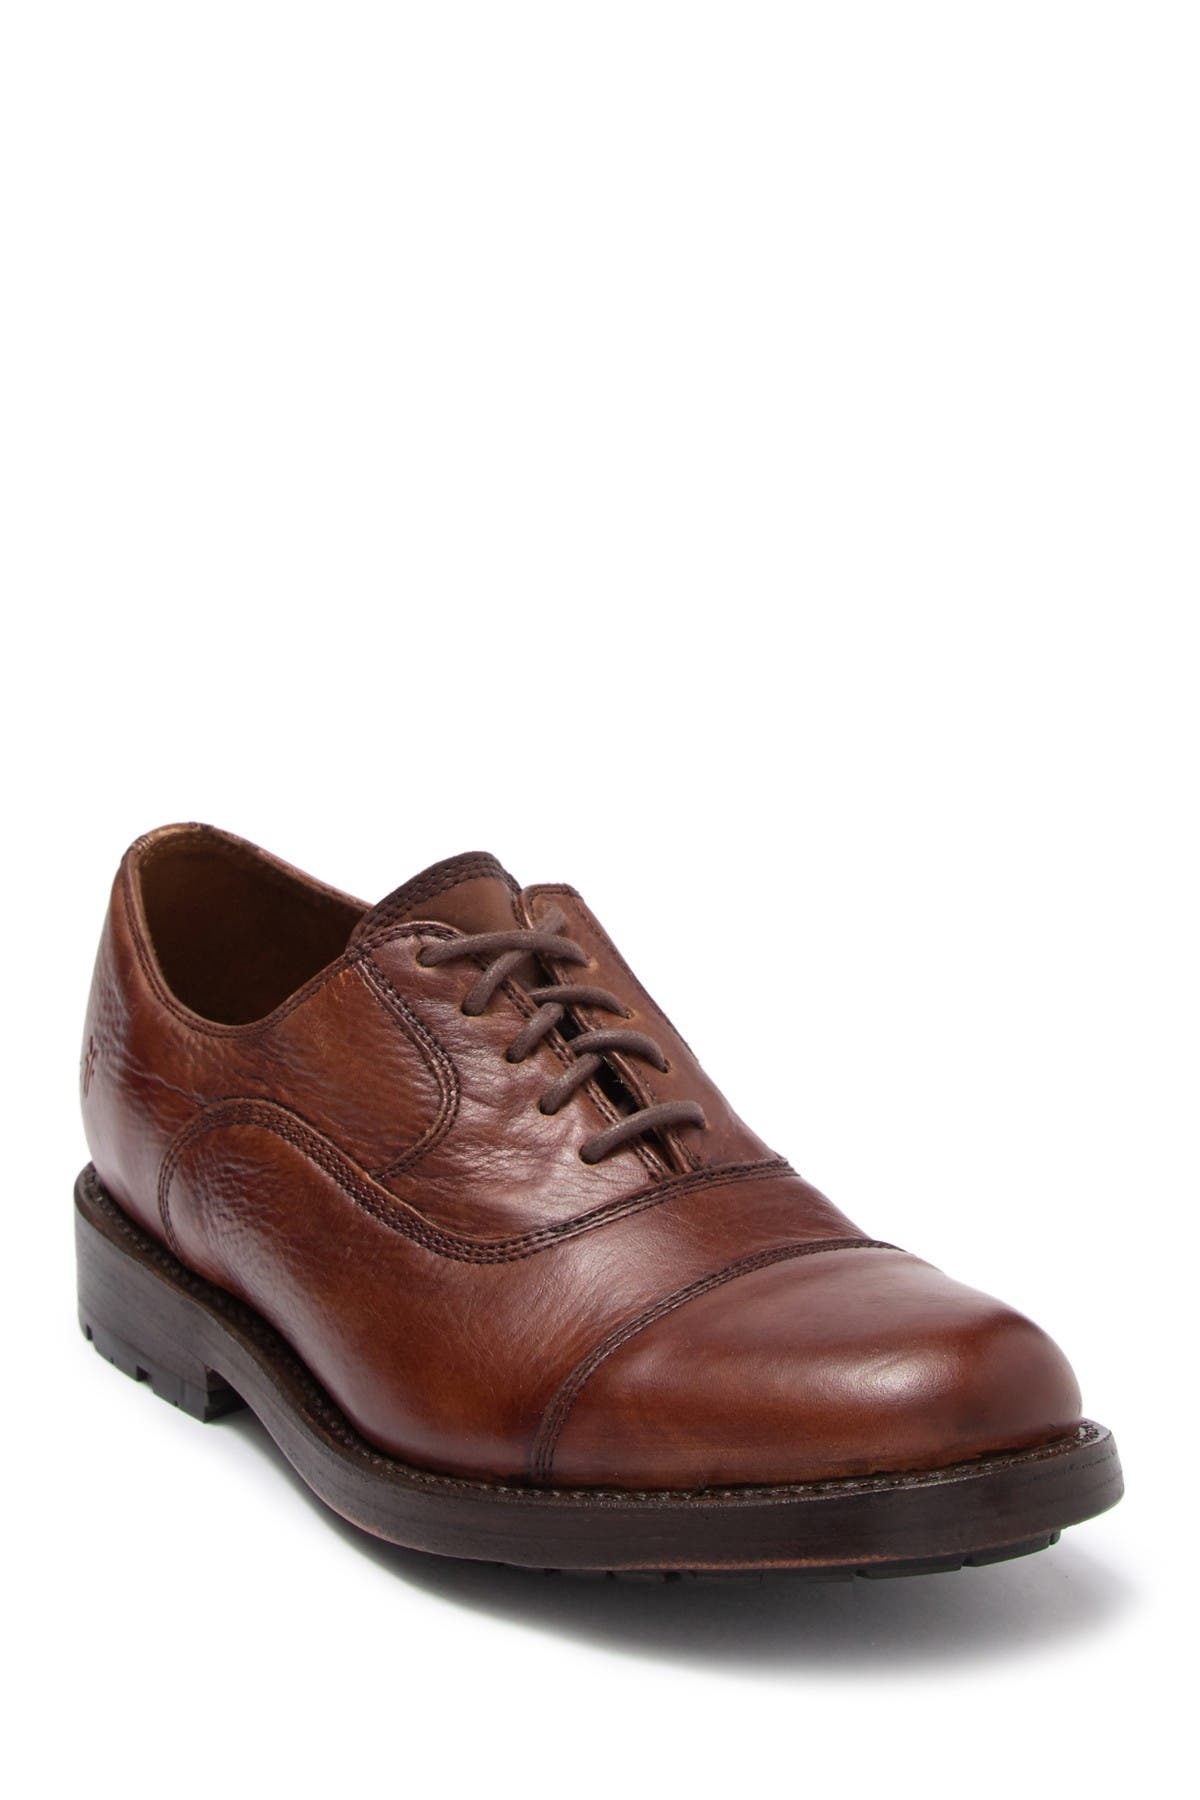 Frye Mens Bowery Bal Oxford Casual Oxfords Shoes